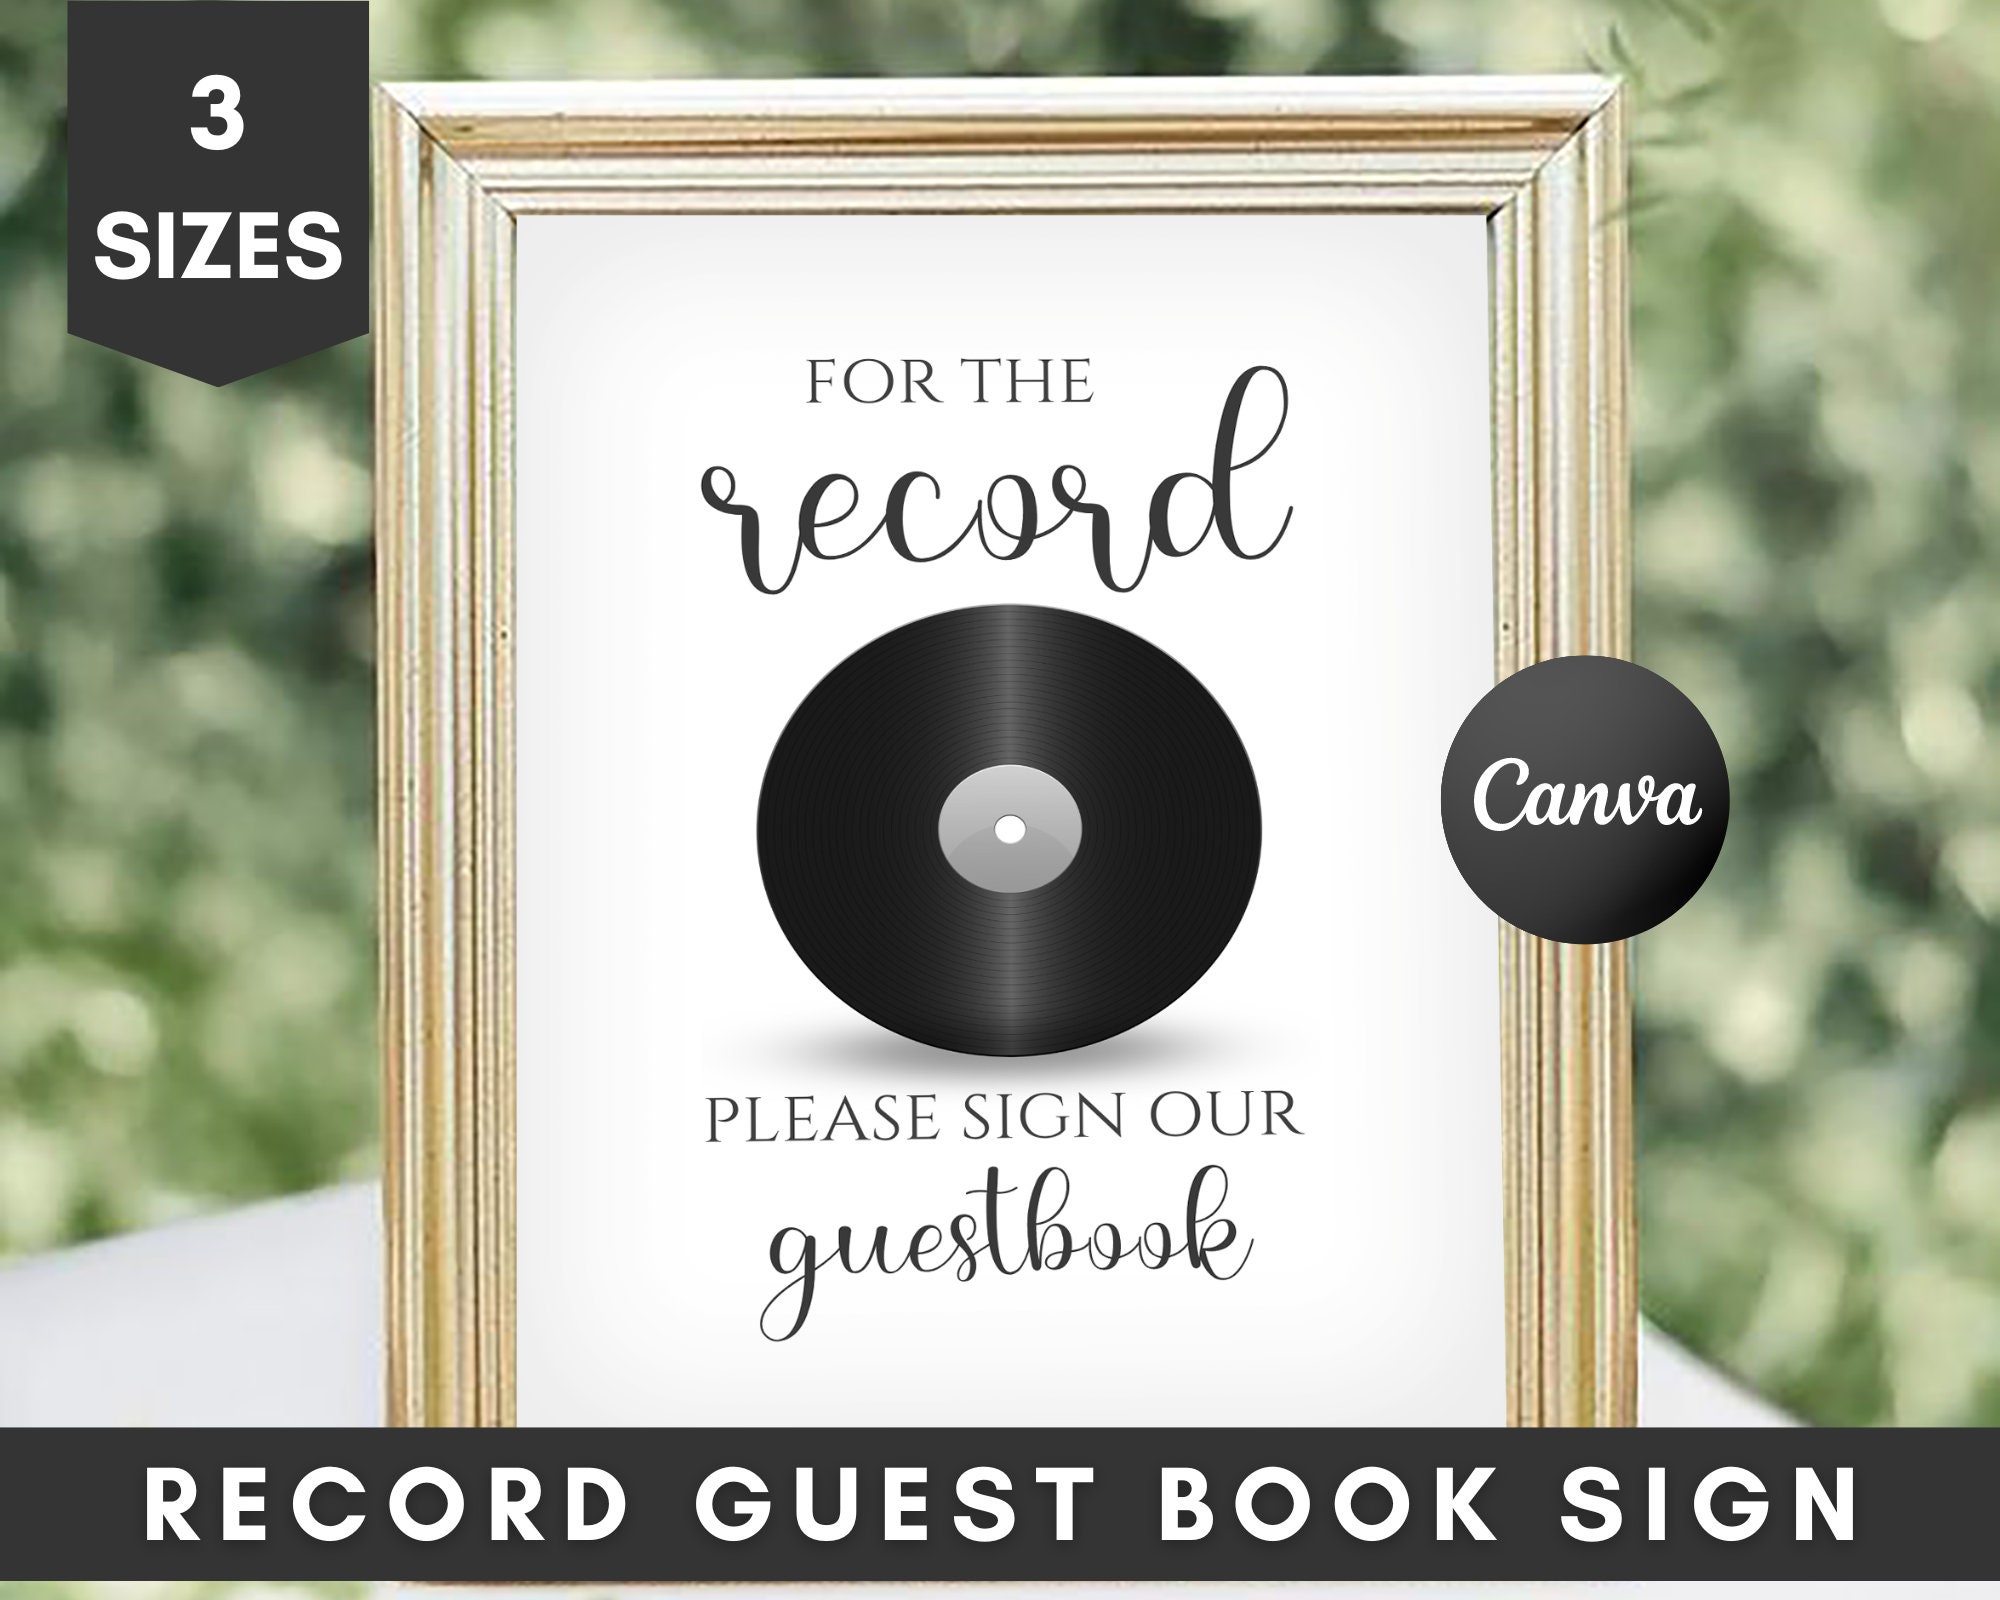 Vinyl Records With Plain White Matte Labels for Crafting, Wall Decor,  Invitations, Wedding Guest Book, Printable Labels 12 Inch Records 